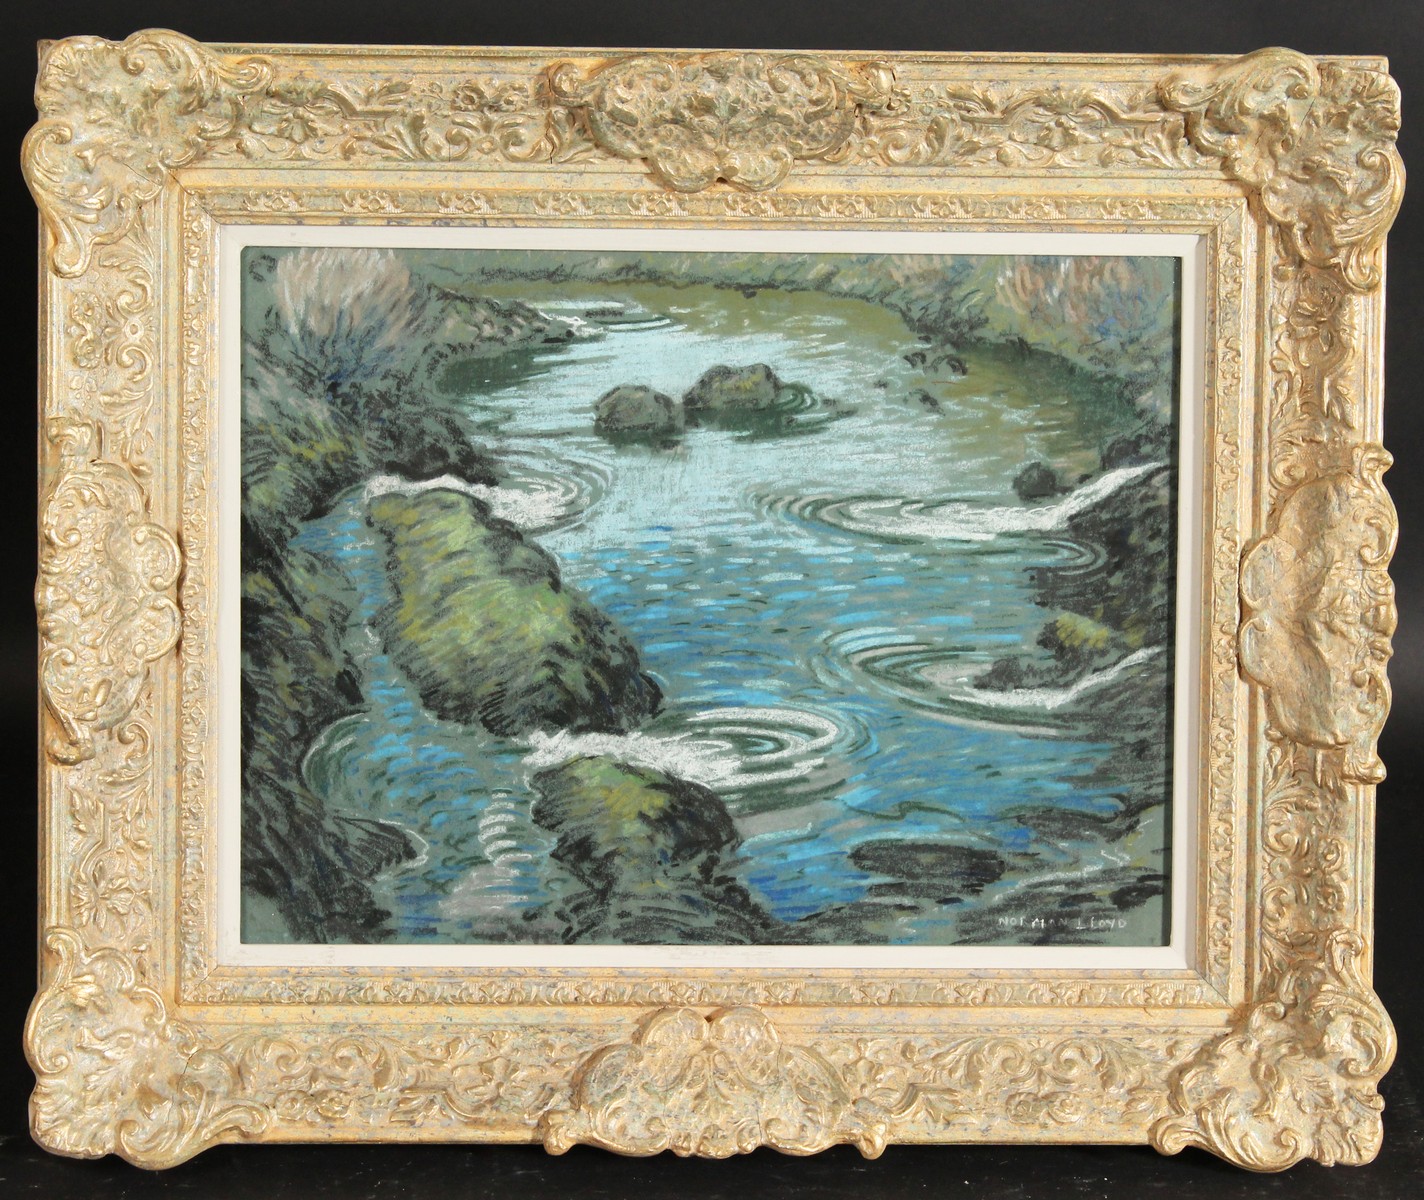 Norman Lloyd (1895-1983) Australian. A Study of a Rocky Stream, Pastel, Signed. 12" x 16". - Image 2 of 4